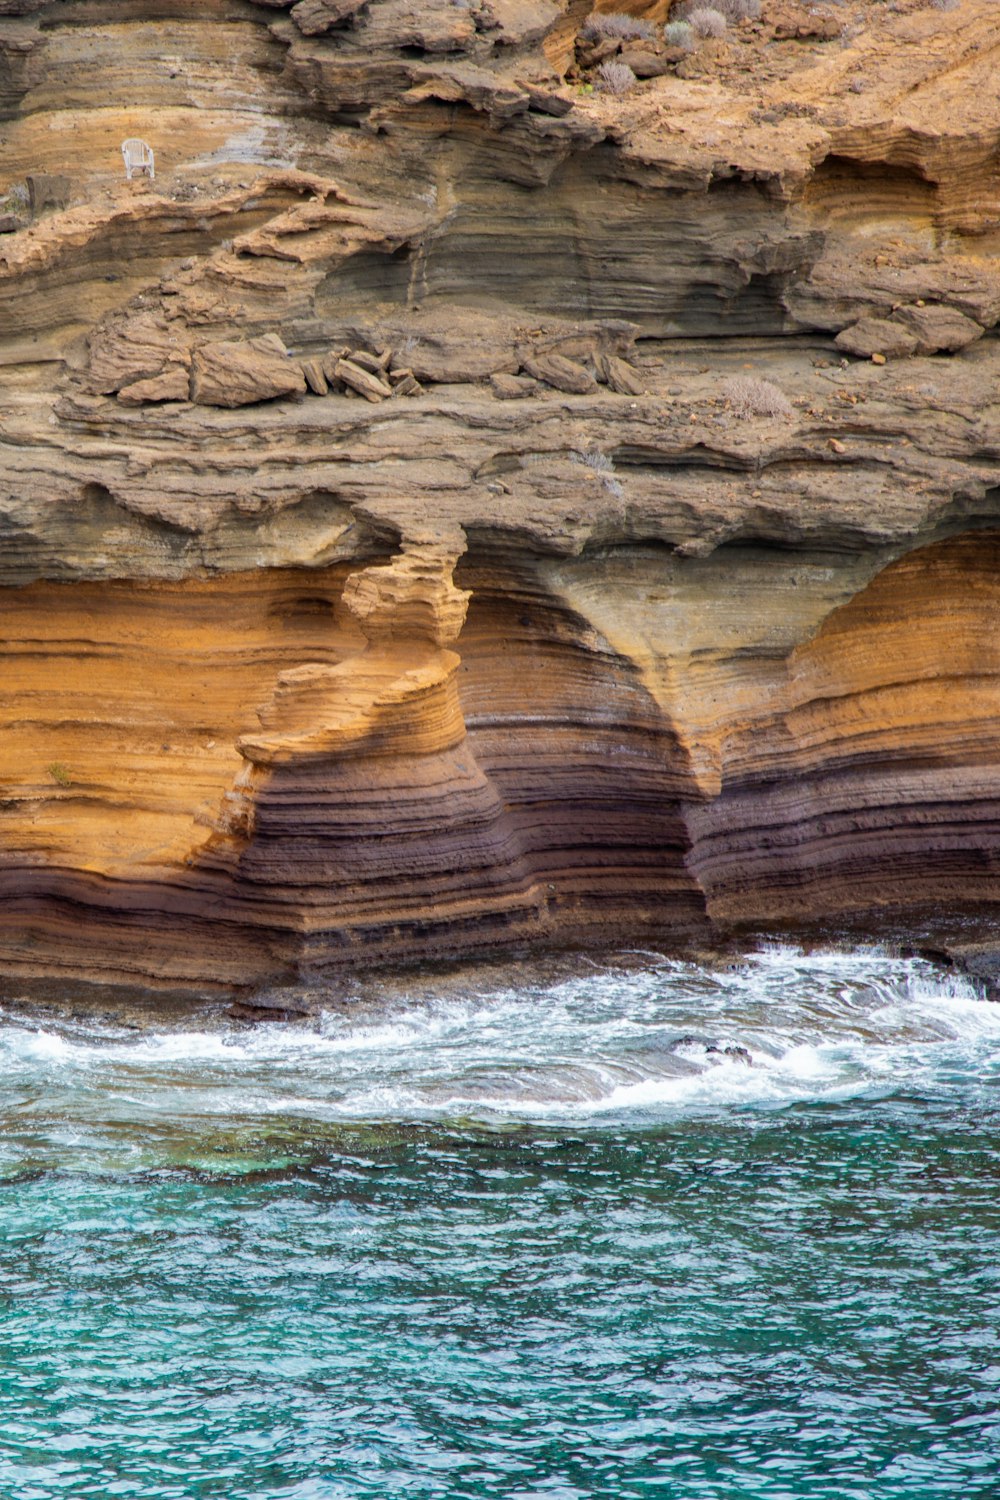 a rocky cliff with a body of water below